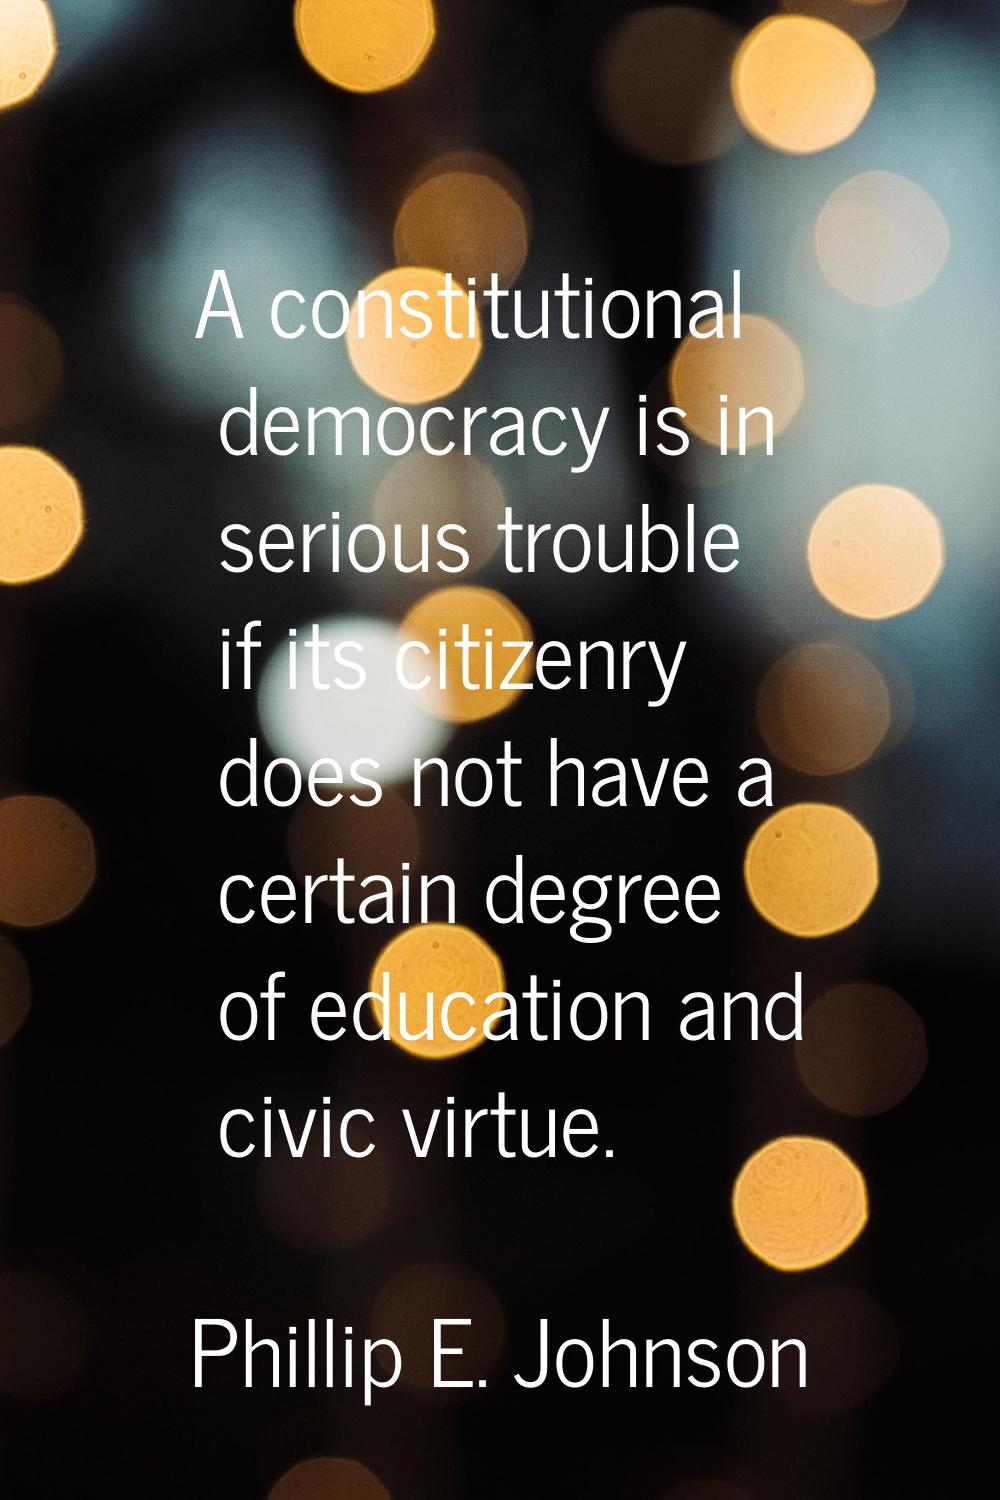 A constitutional democracy is in serious trouble if its citizenry does not have a certain degree of